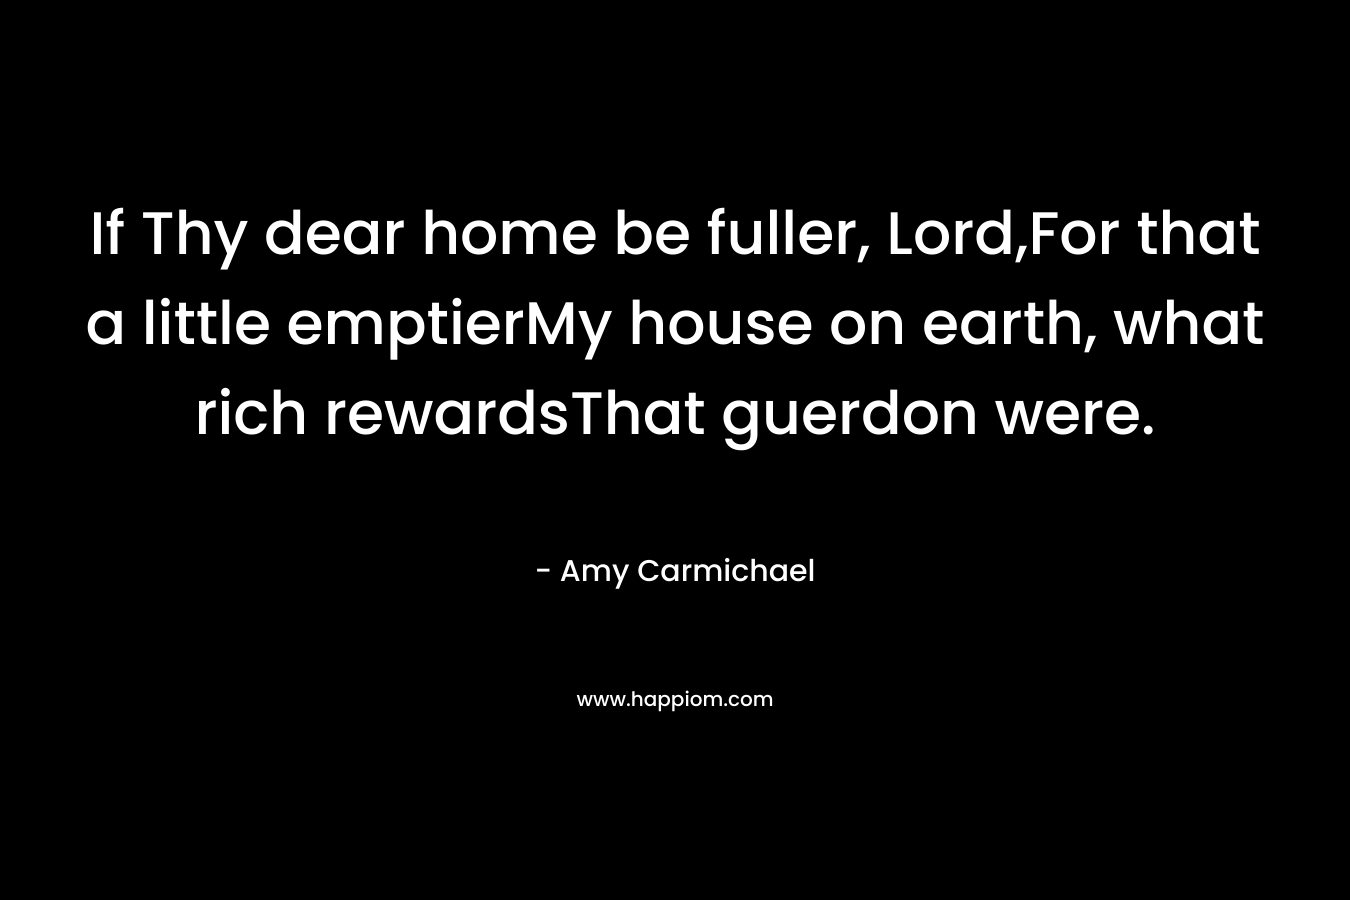 If Thy dear home be fuller, Lord,For that a little emptierMy house on earth, what rich rewardsThat guerdon were. – Amy Carmichael